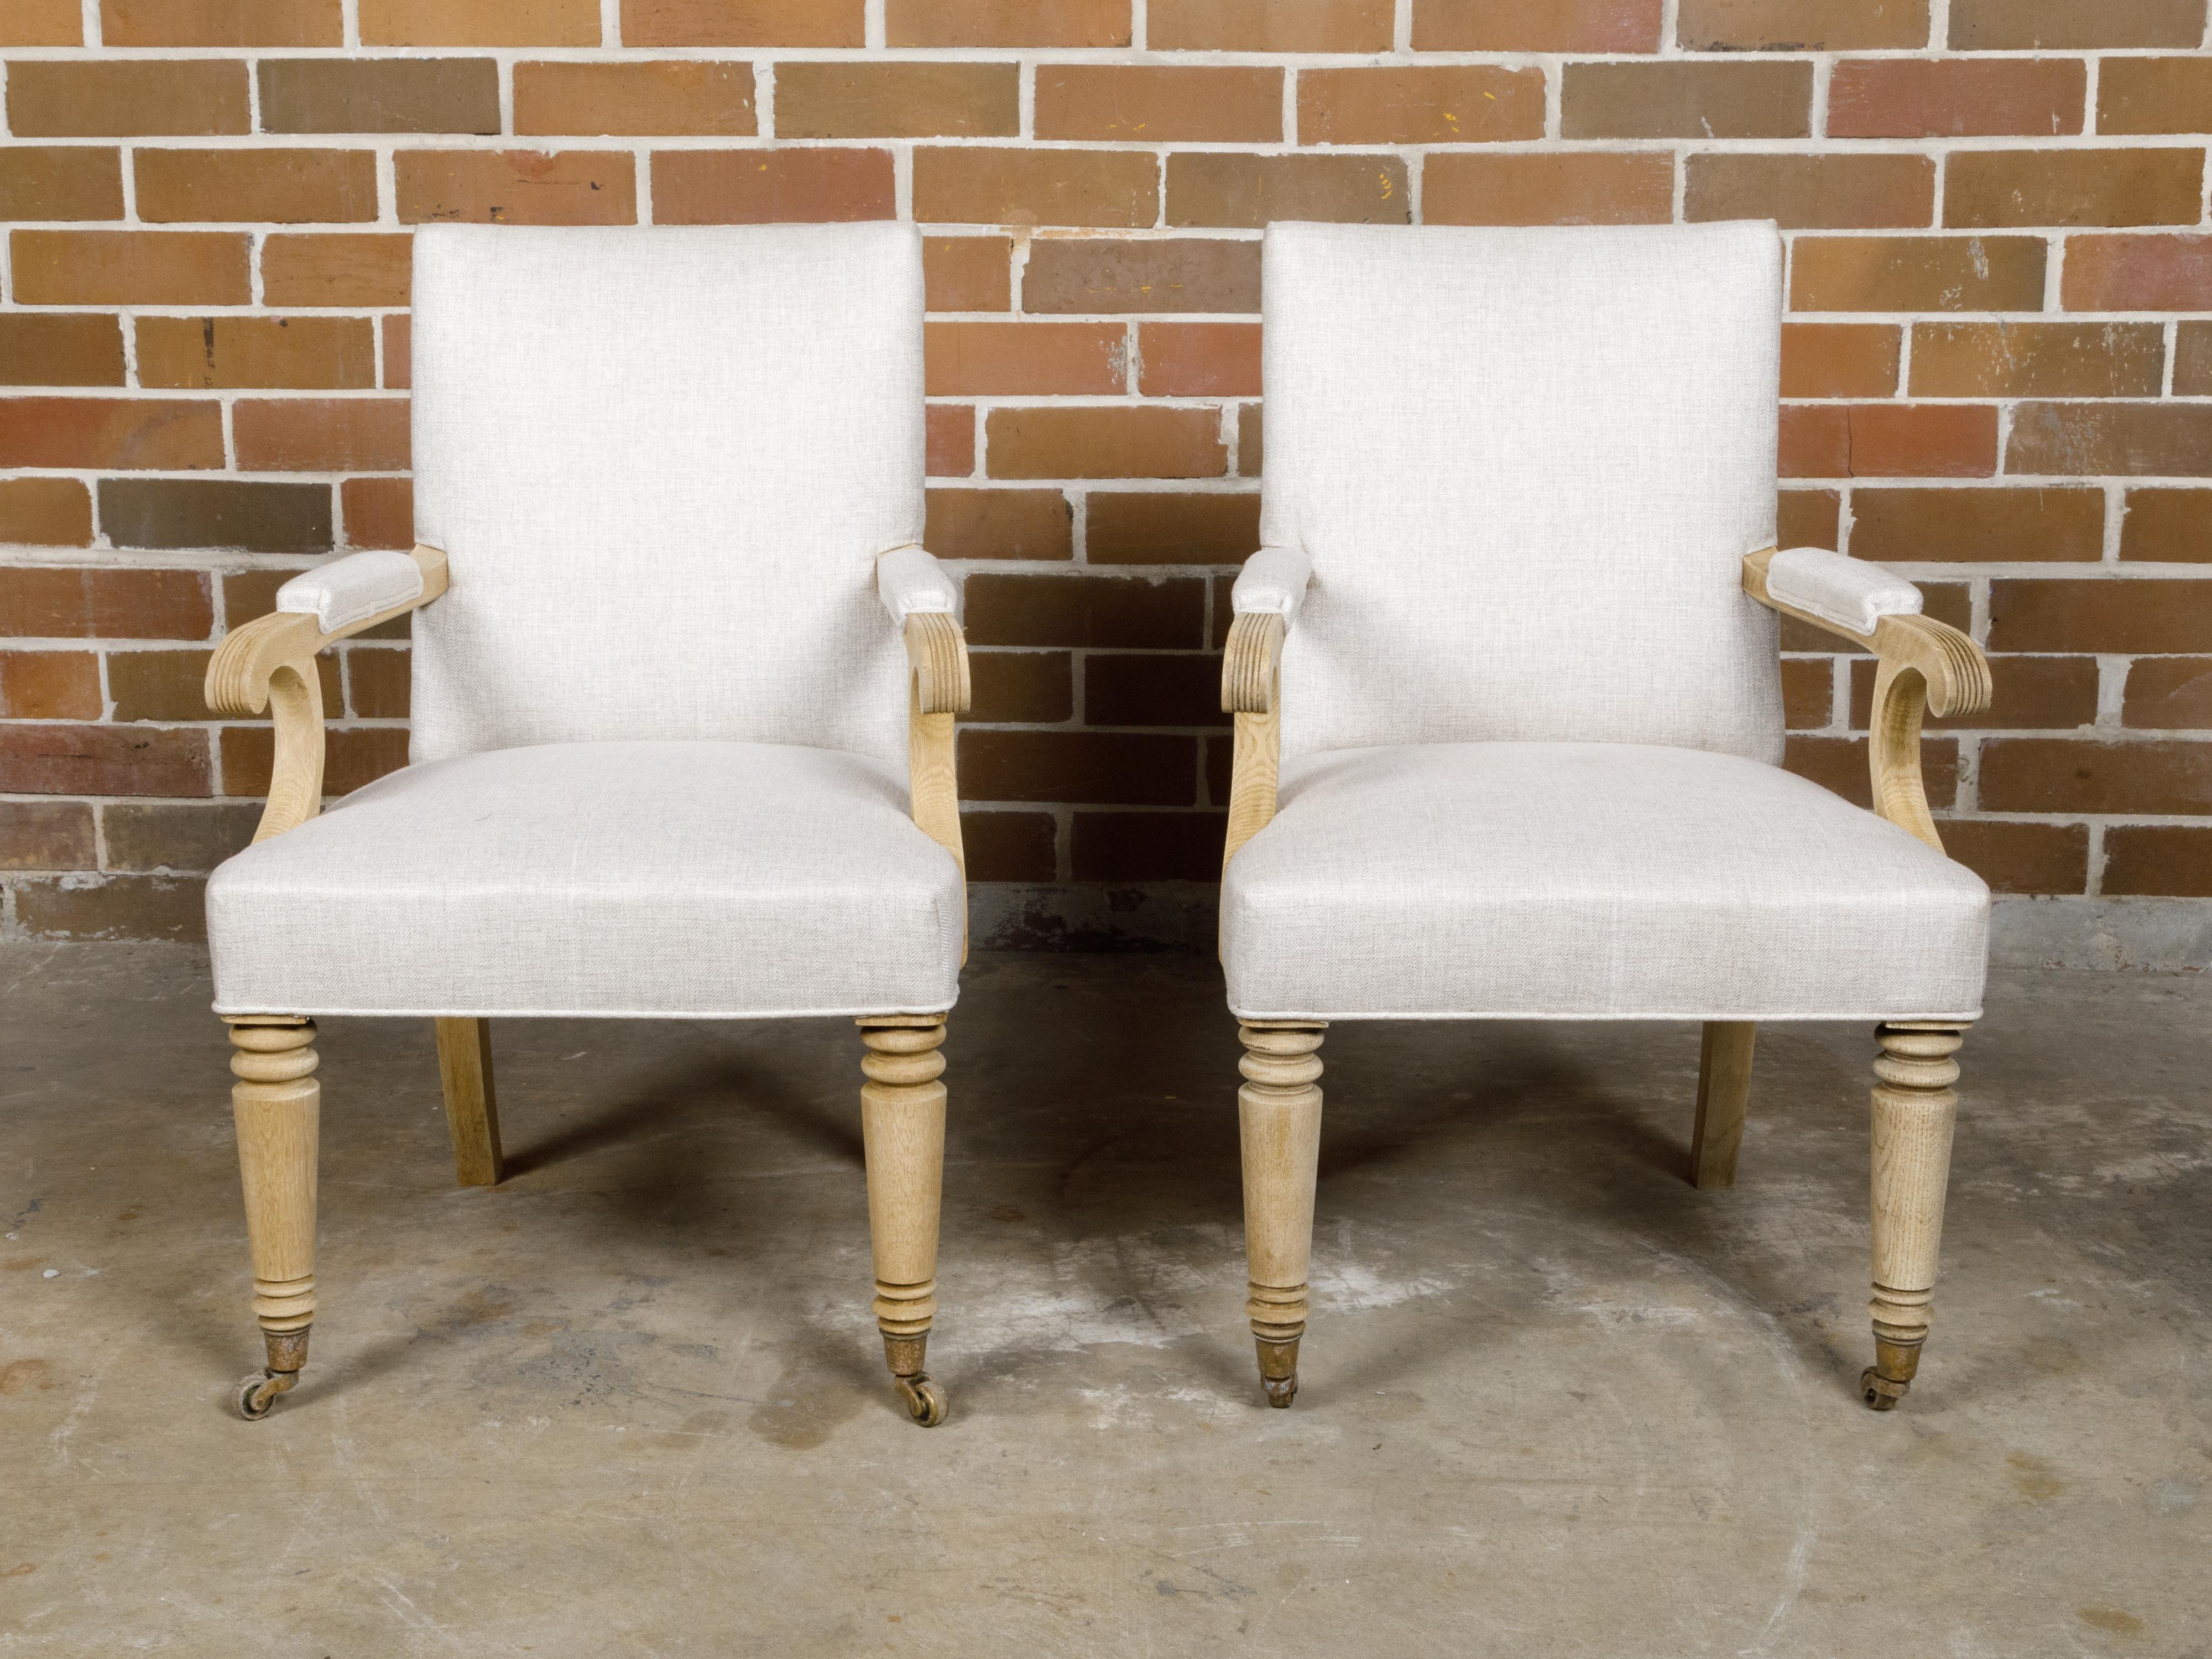 A pair of English Turn of the Century bleached wood armchairs from circa 1900 with elegant arms, scrolling knuckles, turned legs in the front and saber legs in the back. Discover the understated elegance of these English Turn of the Century